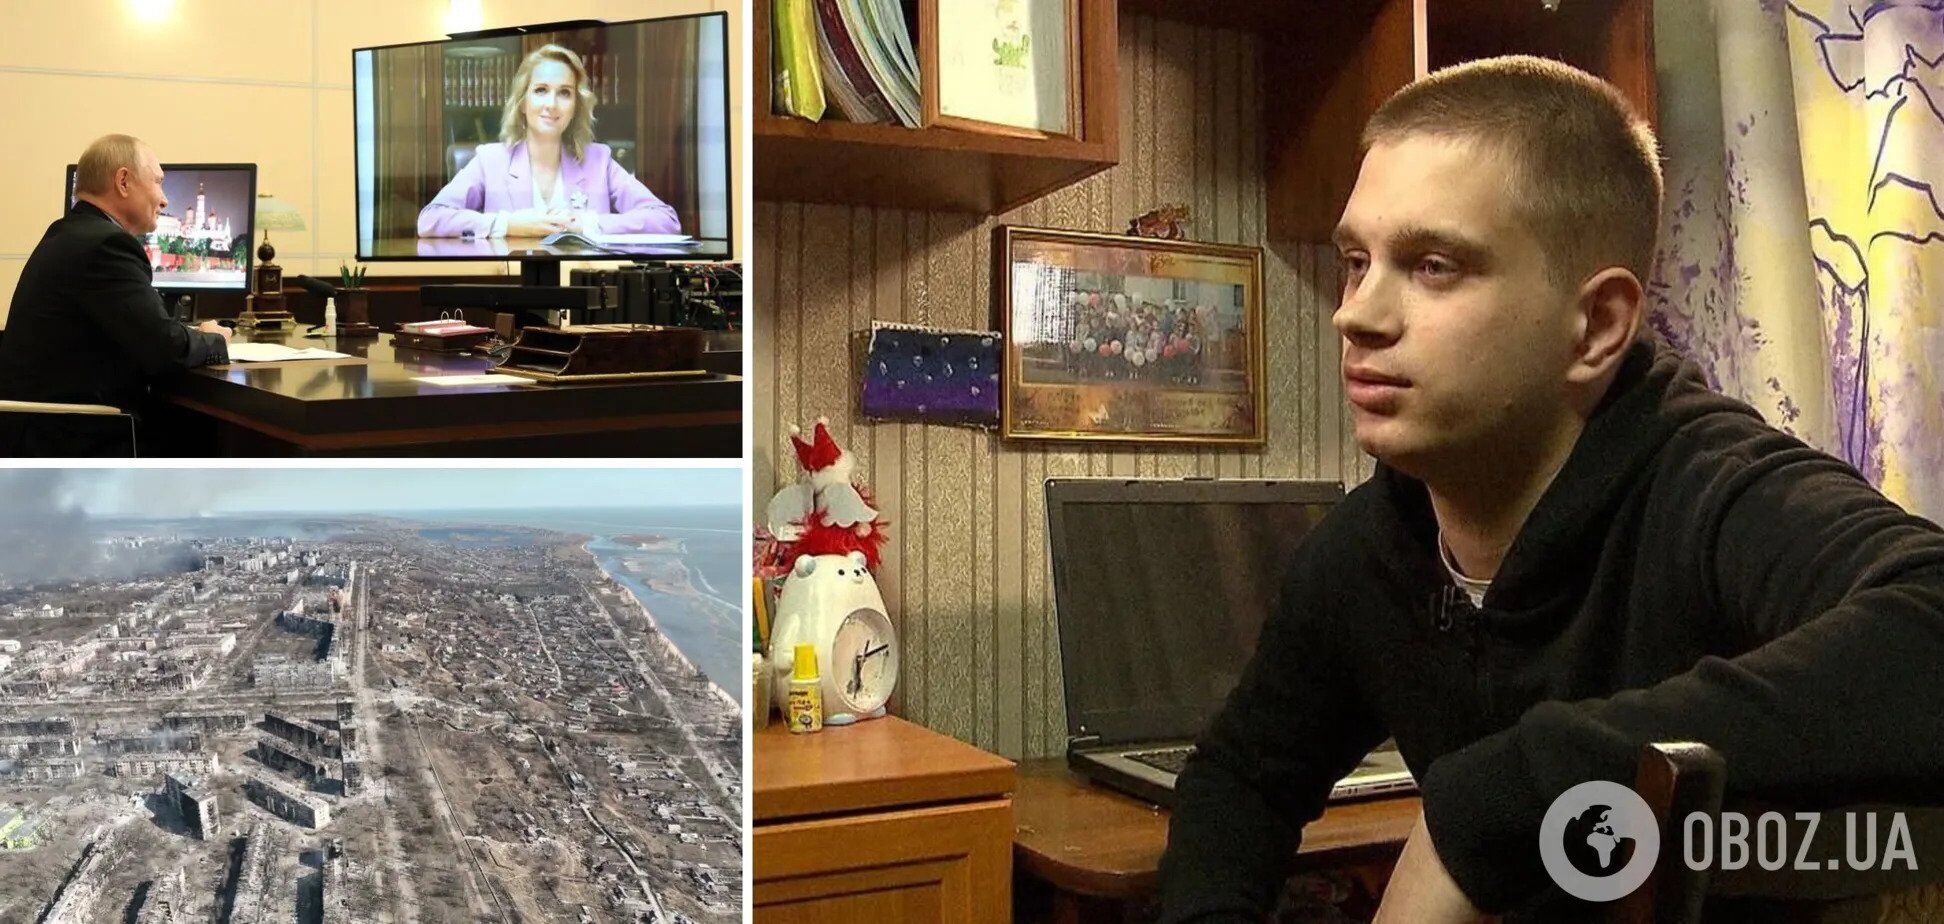 Media: Young man abducted from Mariupol, who was served with a summons in Russia, taken to Belarus